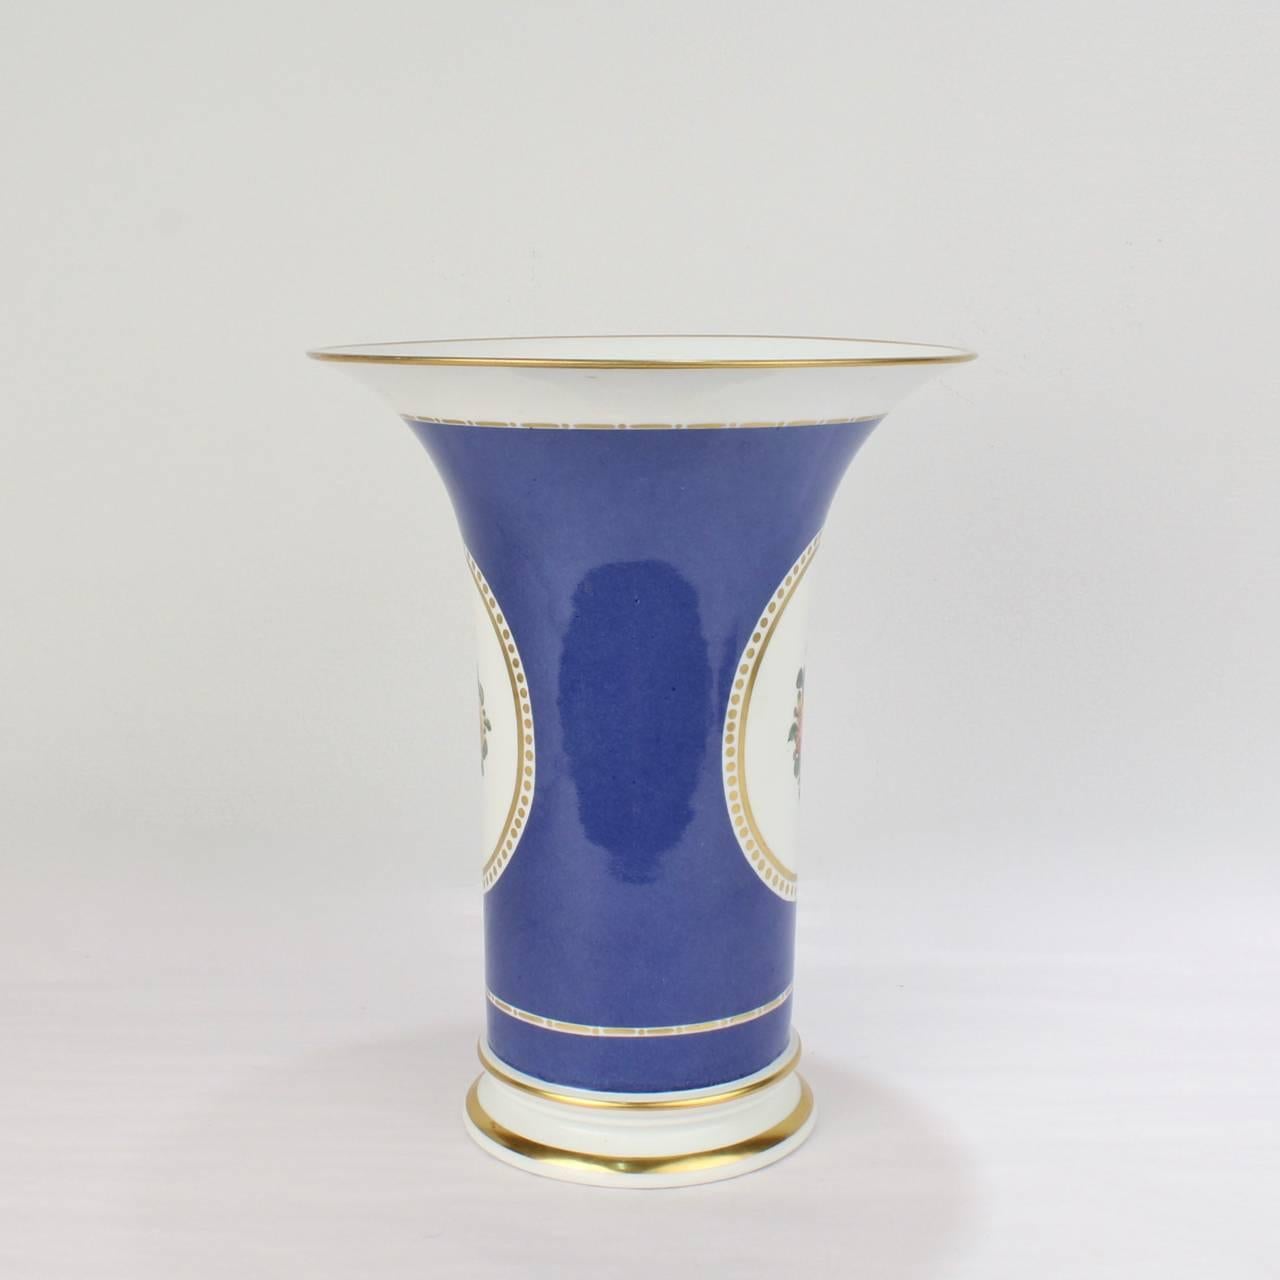 A rare, large-scale Nymphenburg porcelain trumpet form flower vase. 

With crisp, clean lines that harken back to the Biedermeier period and dovetail perfectly with the aesthetic of 20th century modernism.

Having a fine powder blue ground and